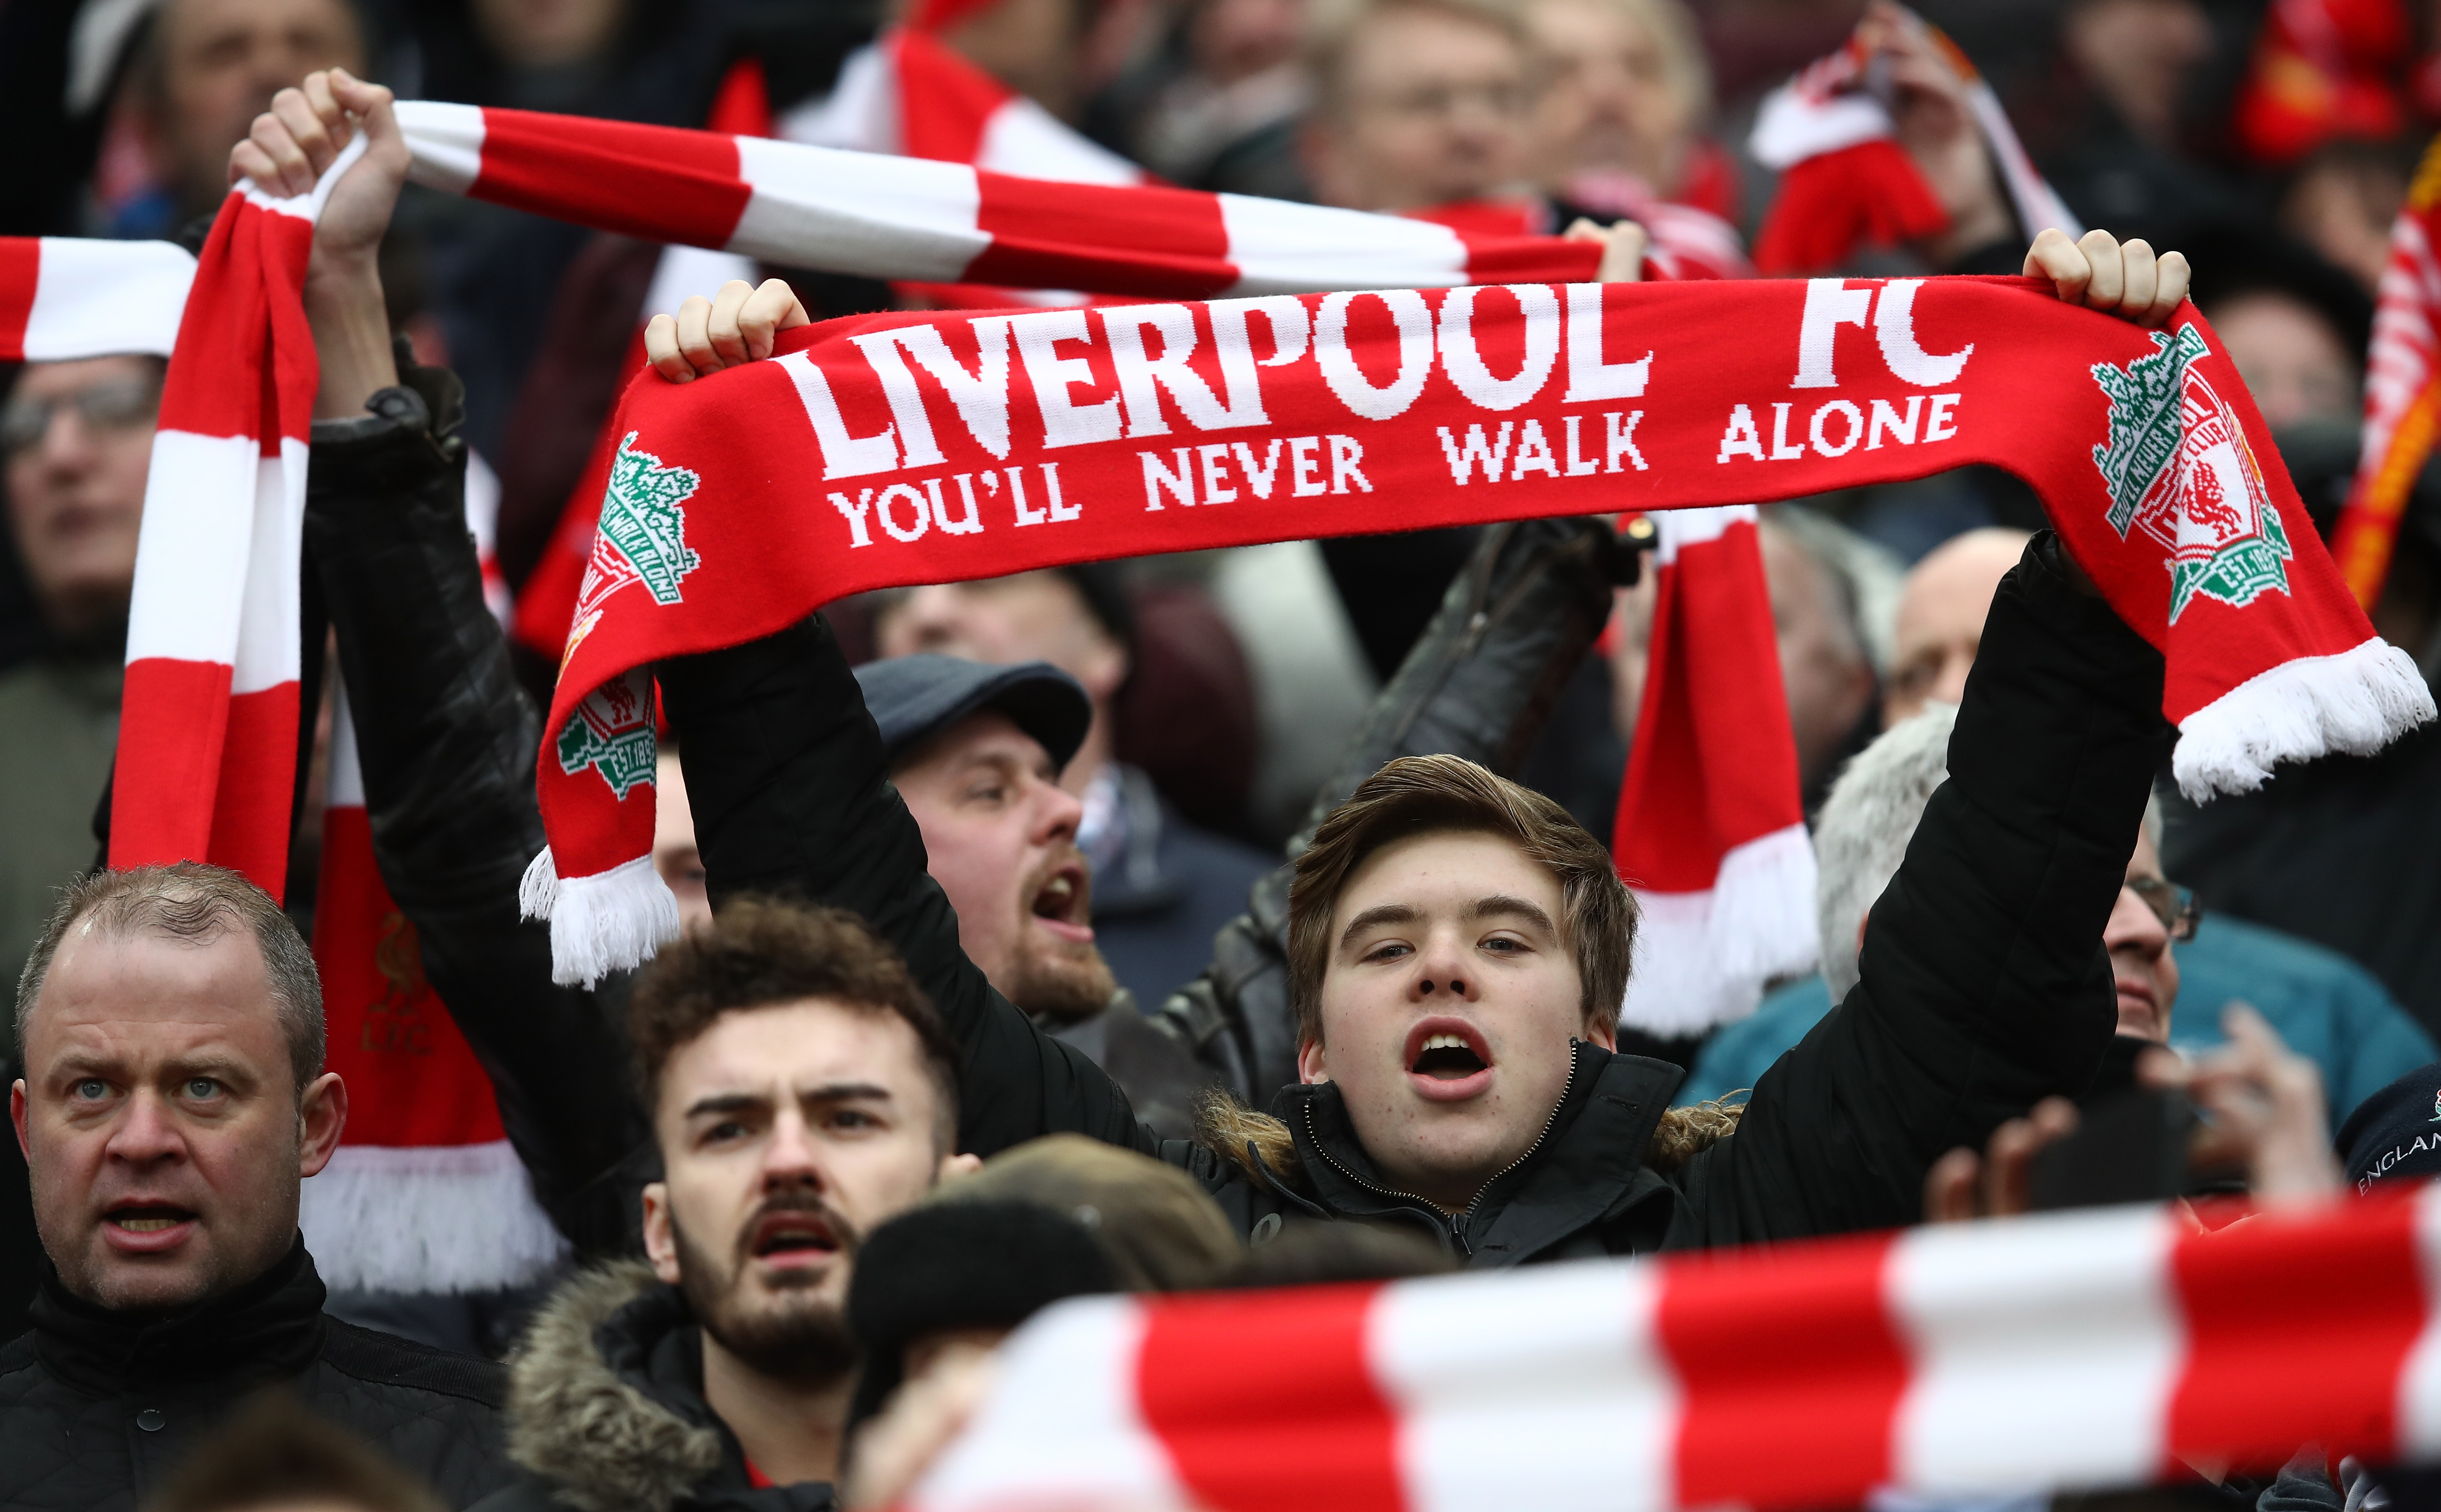 LIVERPOOL, ENGLAND - JANUARY 21: Liverpool fans are seen outside the stadium prior to the Premier League match between Liverpool and Swansea City at Anfield on January 21, 2017 in Liverpool, England.  (Photo by Julian Finney/Getty Images)